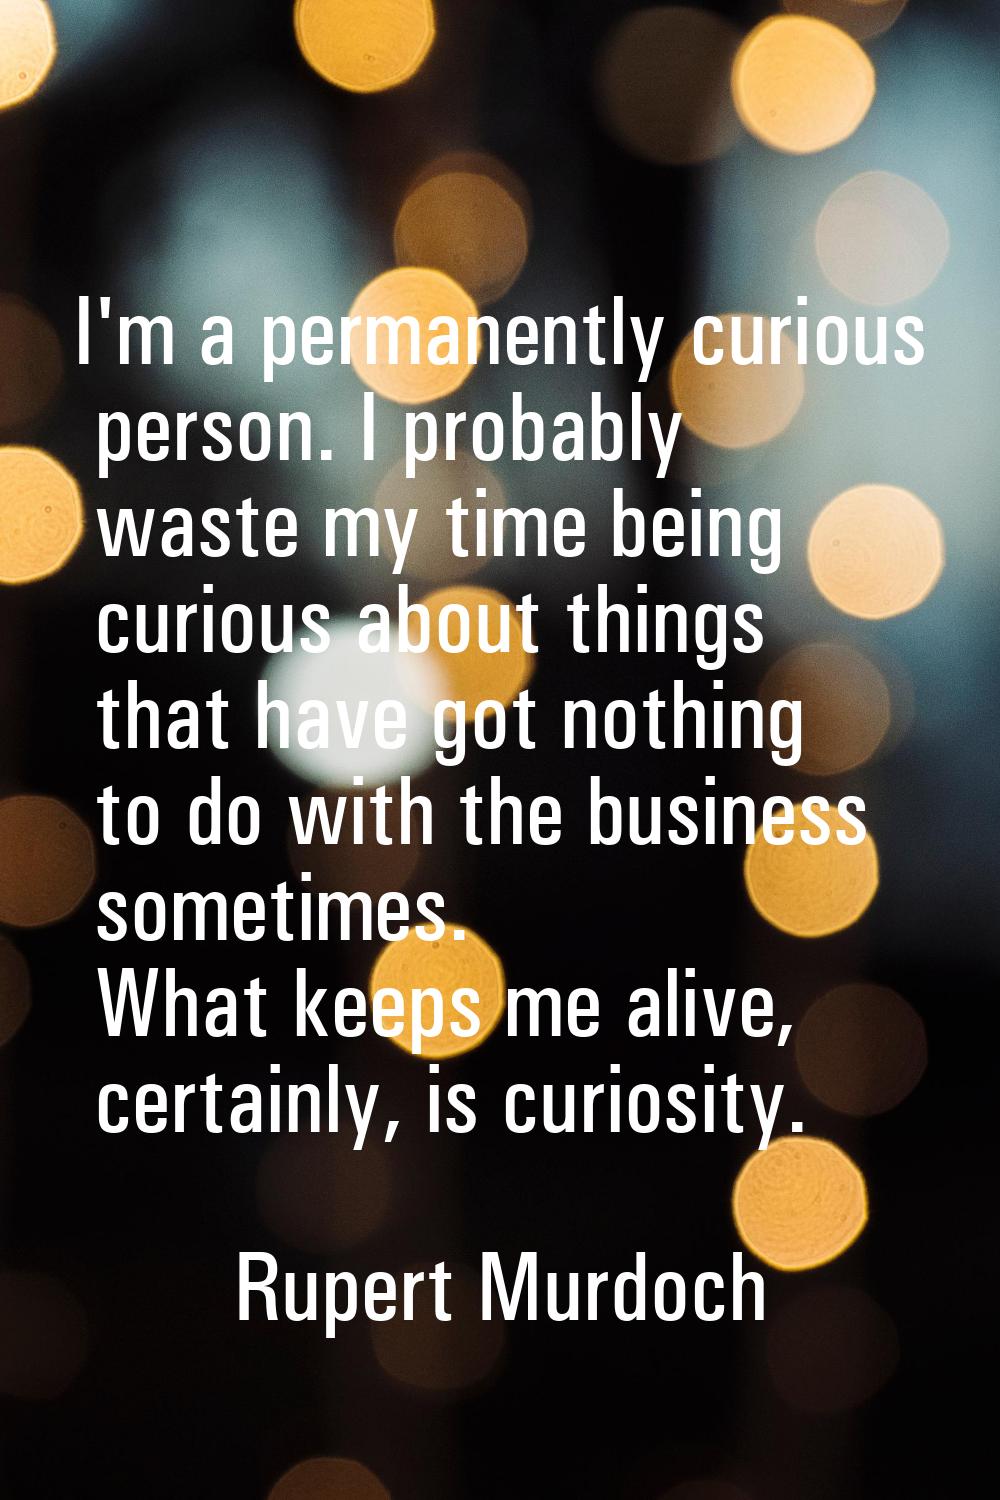 I'm a permanently curious person. I probably waste my time being curious about things that have got